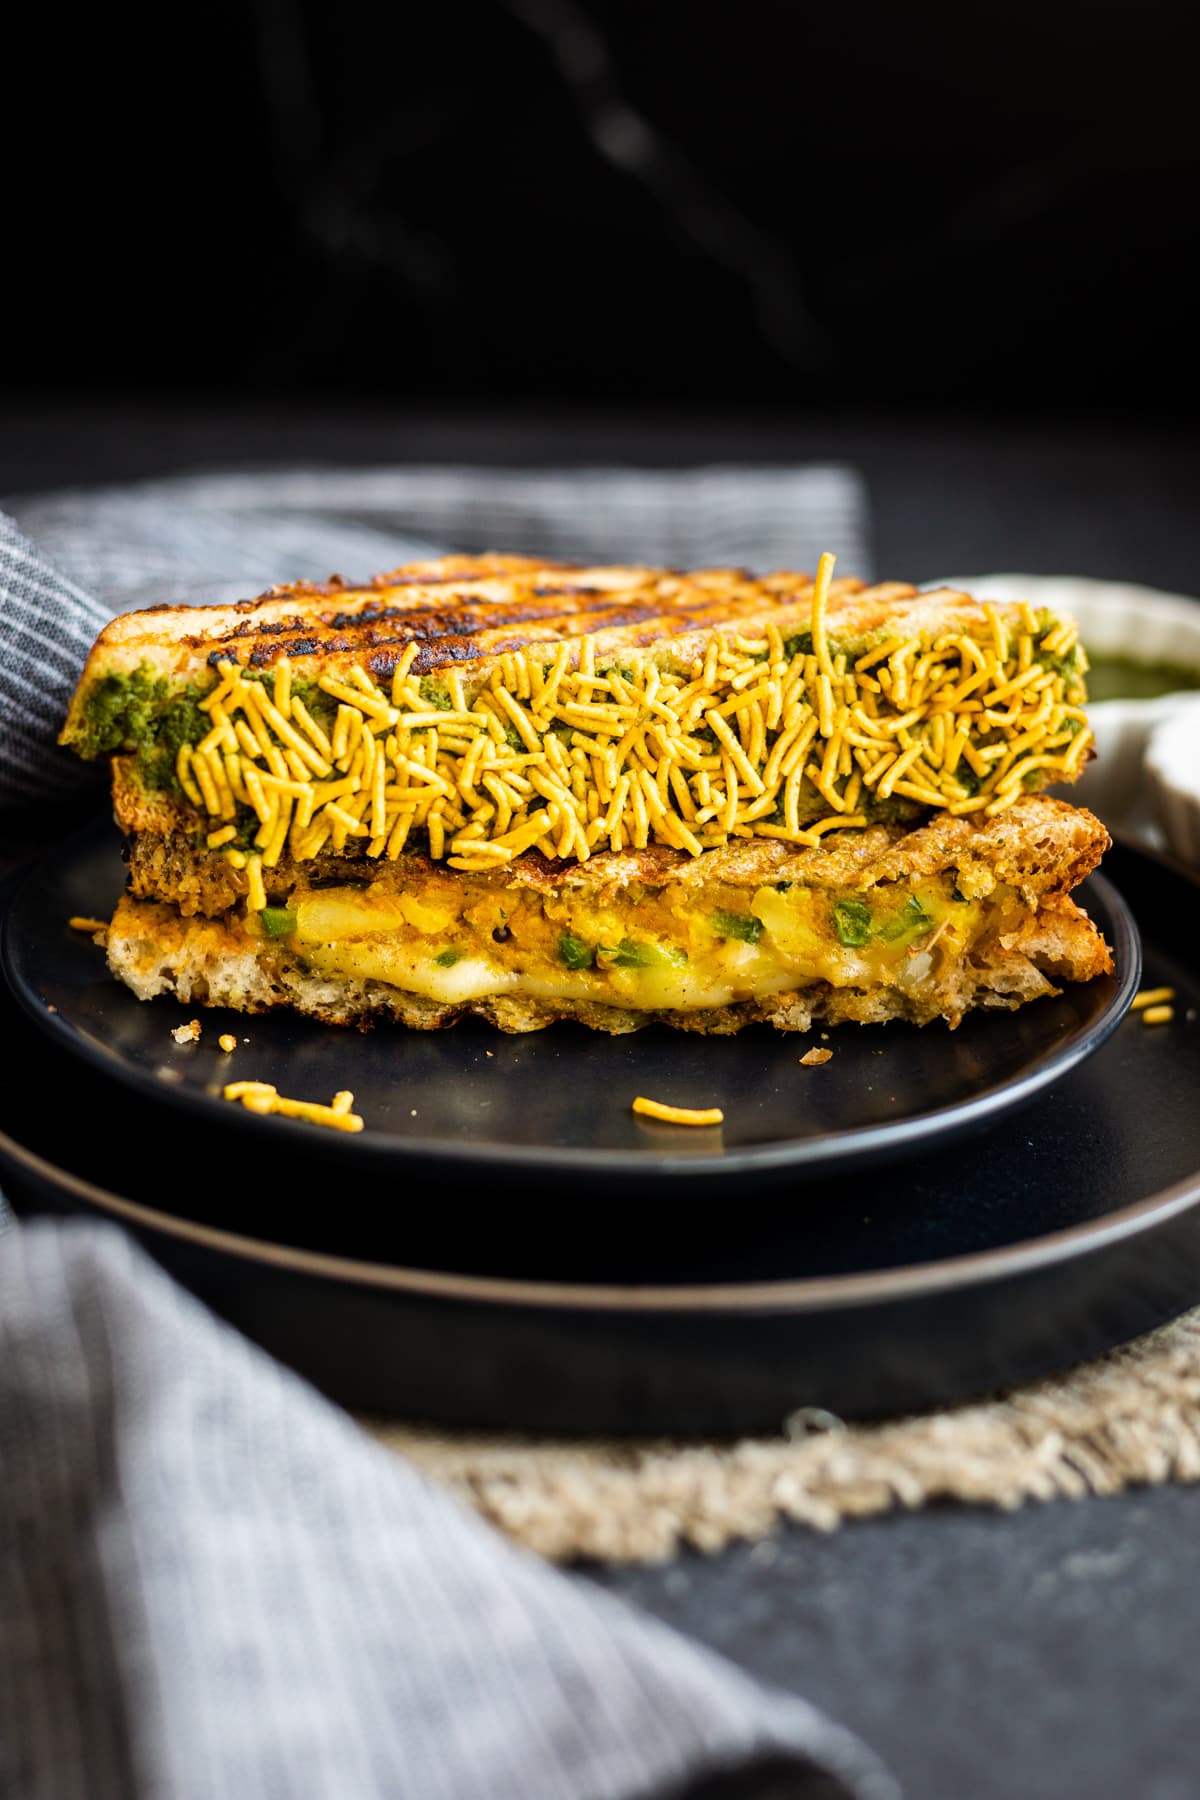 bombay cheese toastie coated in namkeen on black plate